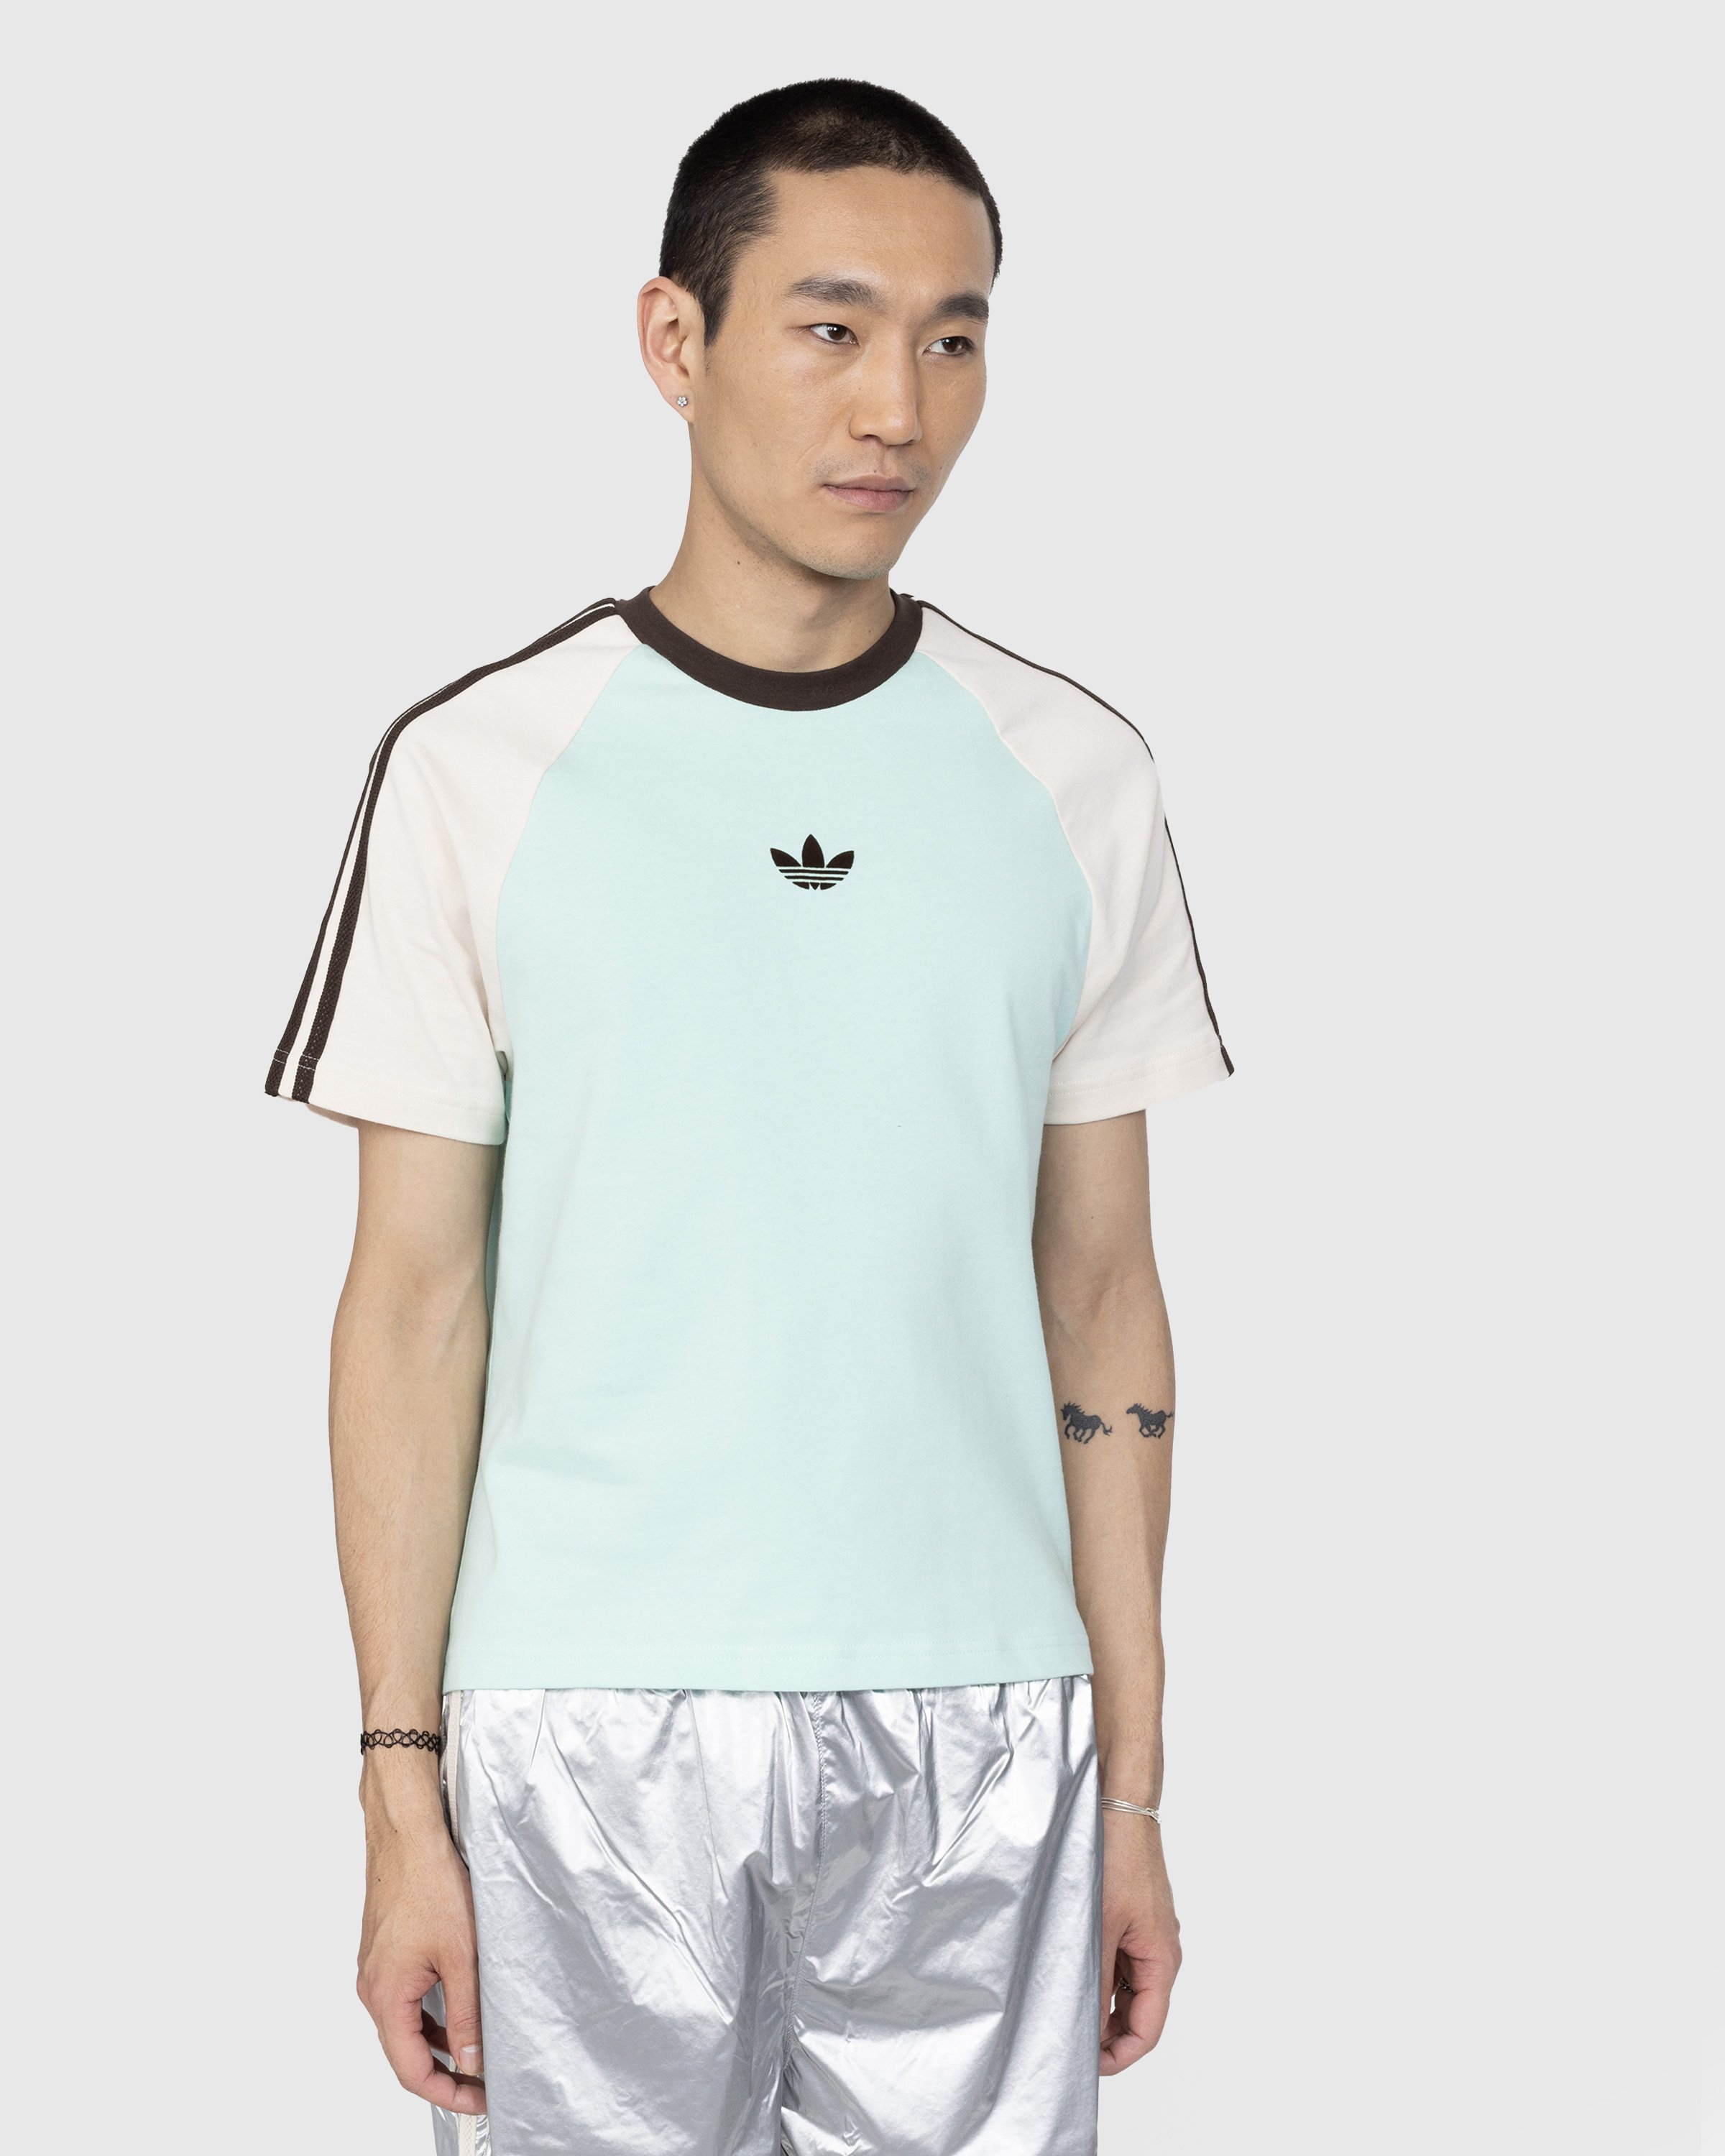 Adidas x Wales Bonner - Organic Cotton Tee Clear Mint - Clothing - Green - Image 2